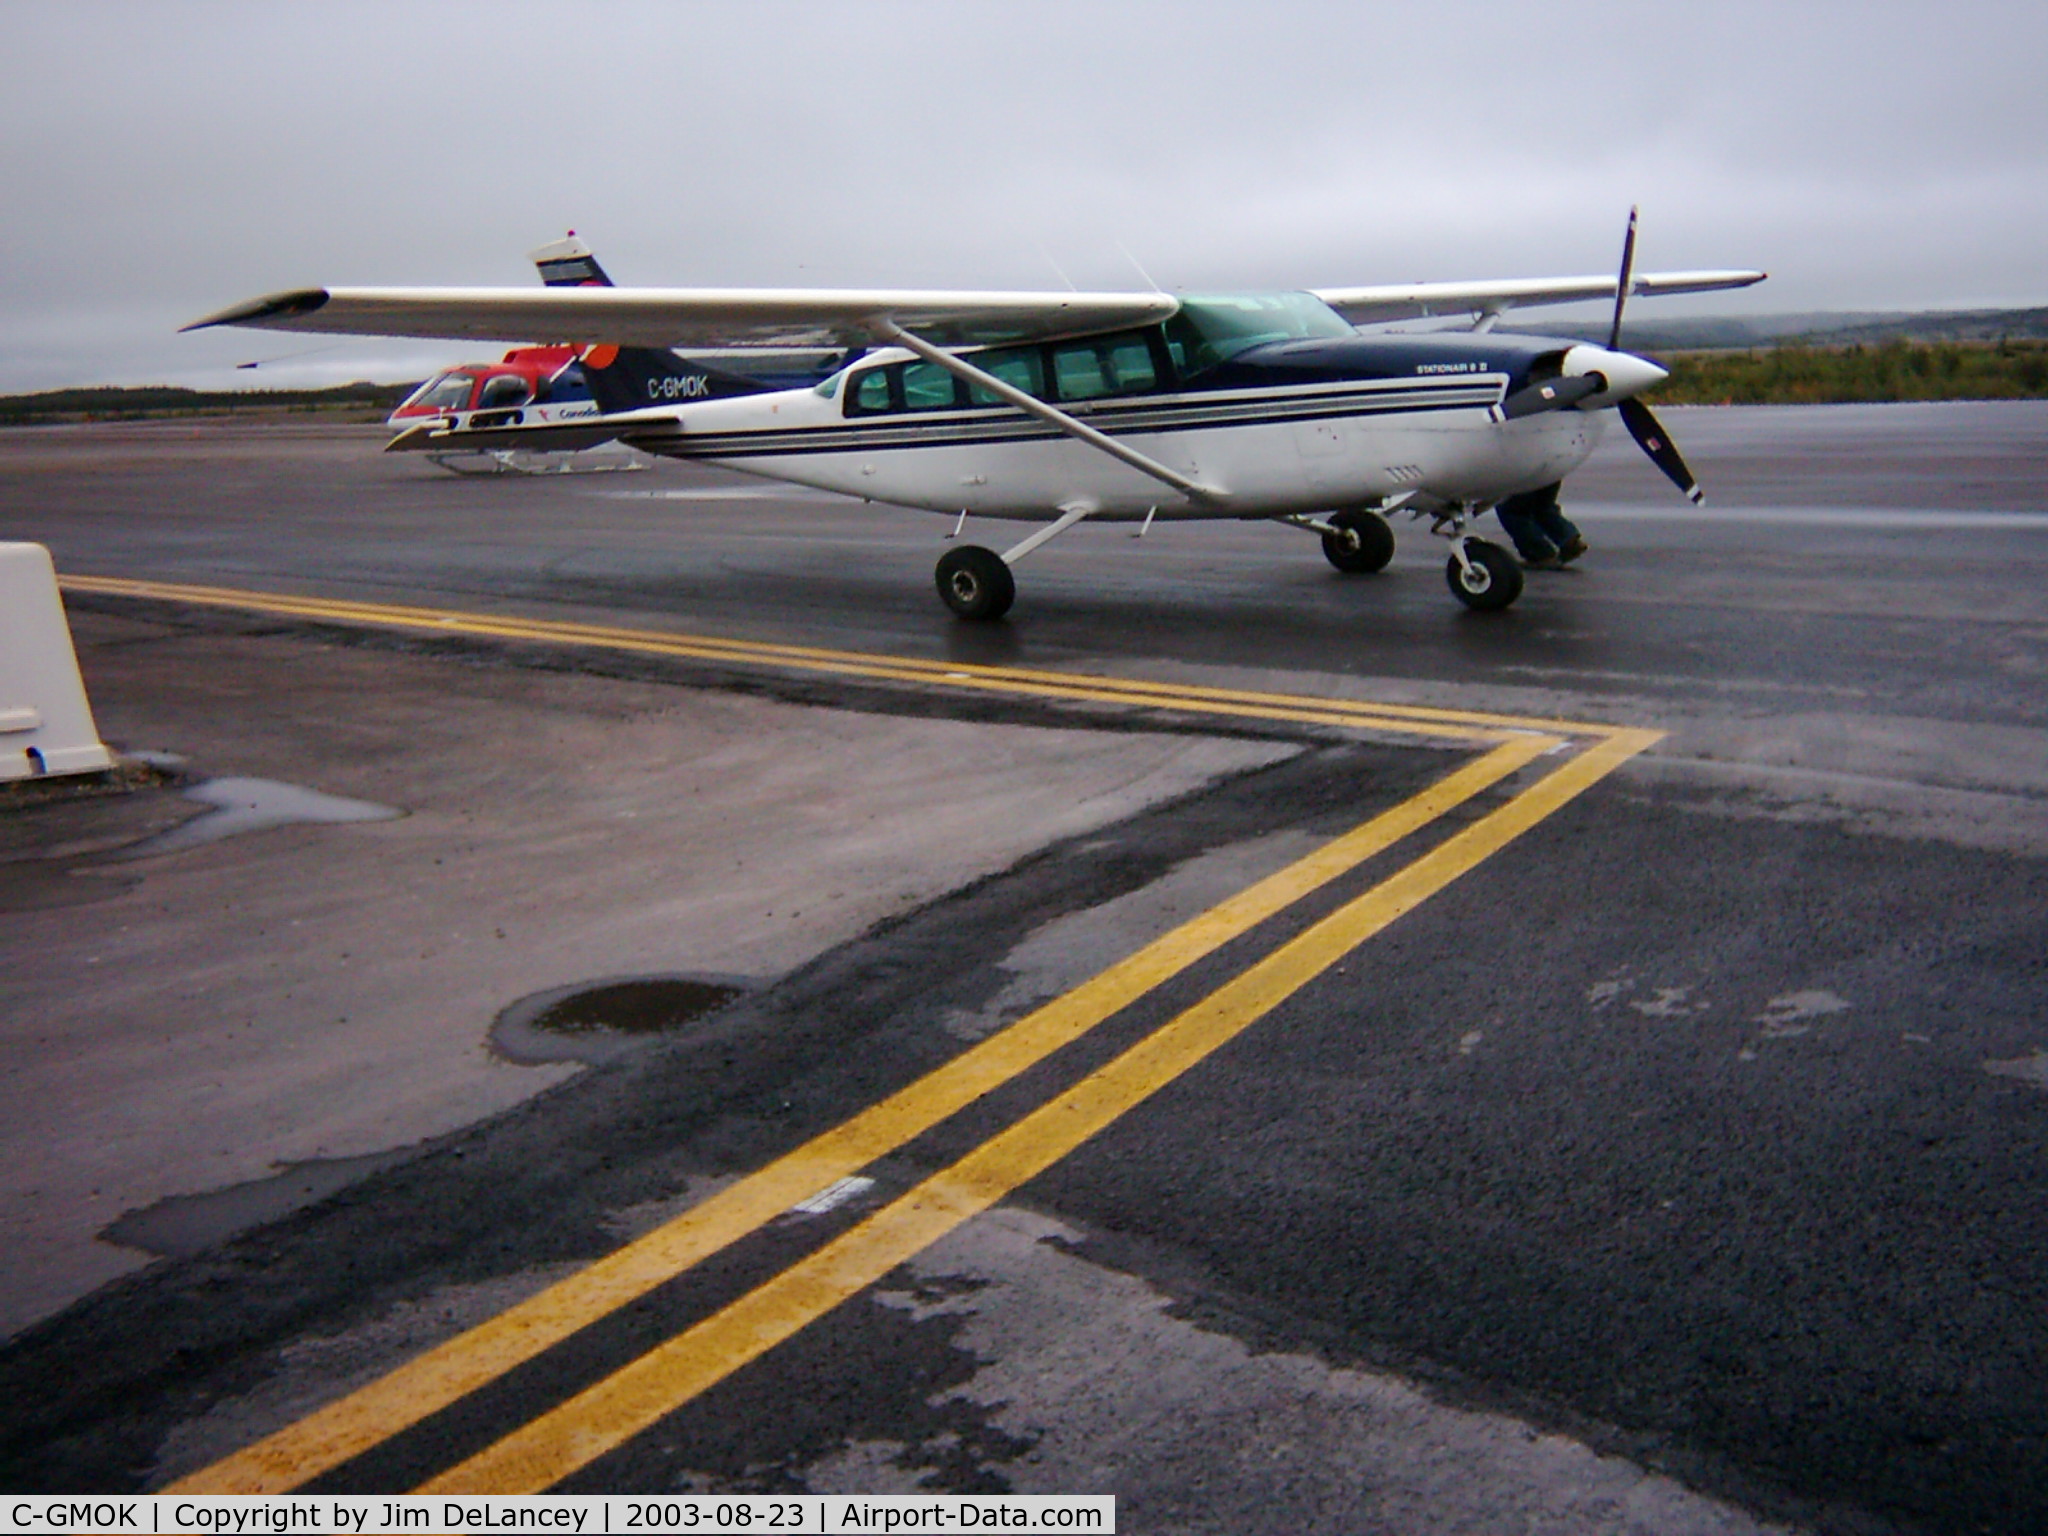 C-GMOK, Cessna 207A C/N 207-00673, Great shape - we flew from Inuvik to Tuktoyaktuk in this Beech 200 in August of 2003.